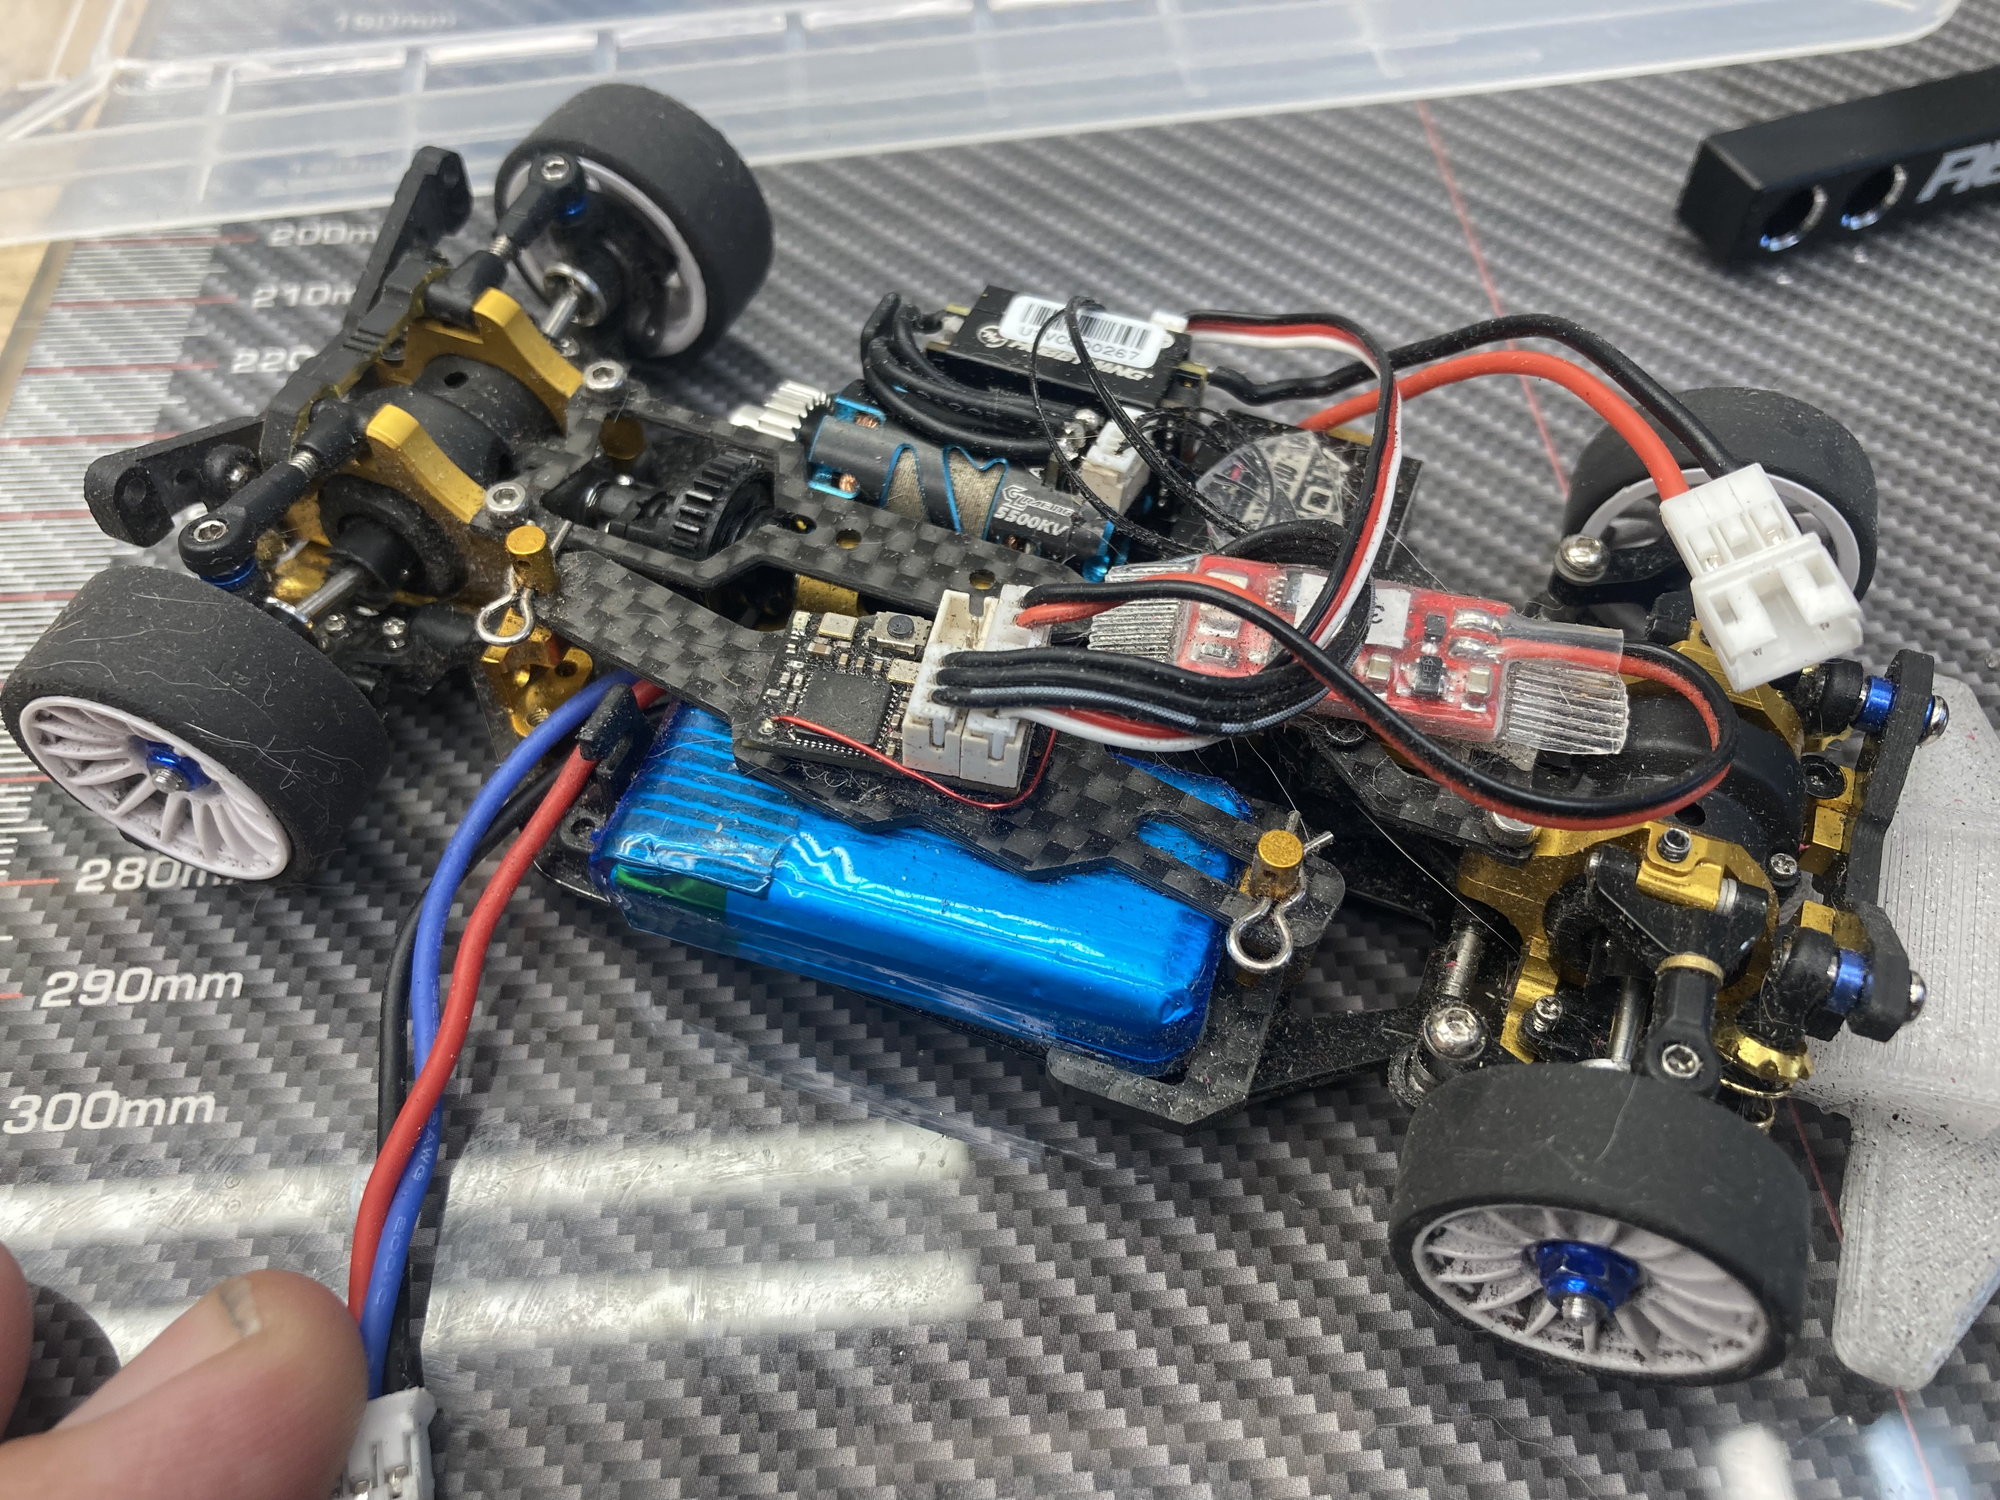 Atomic SZ2 Shaft Drive AWD Chassis Kit - Page 2 - R/C Tech Forums